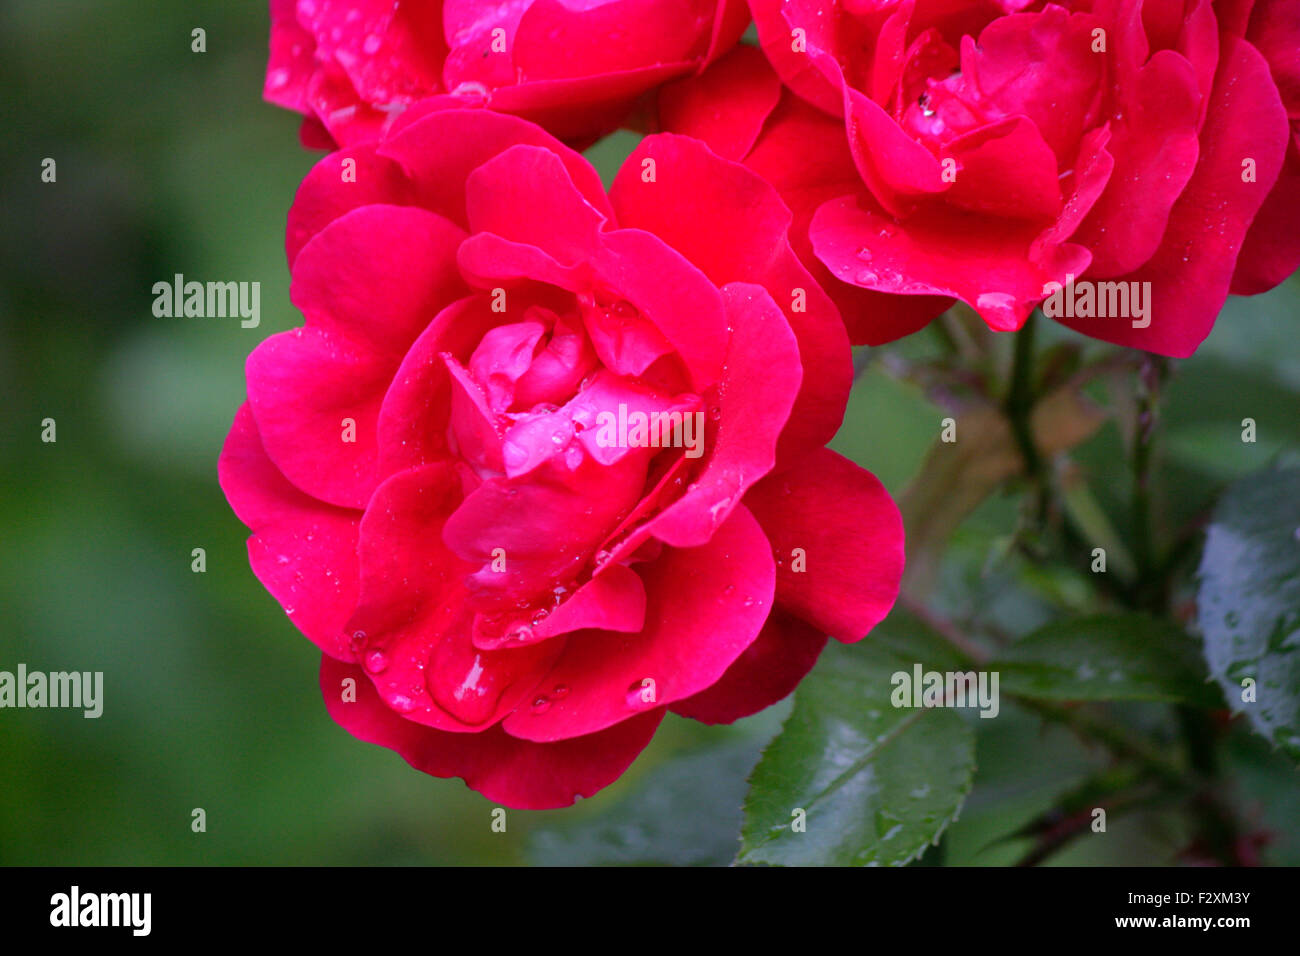 Rosa Rosen High Resolution Stock Photography and Images - Alamy